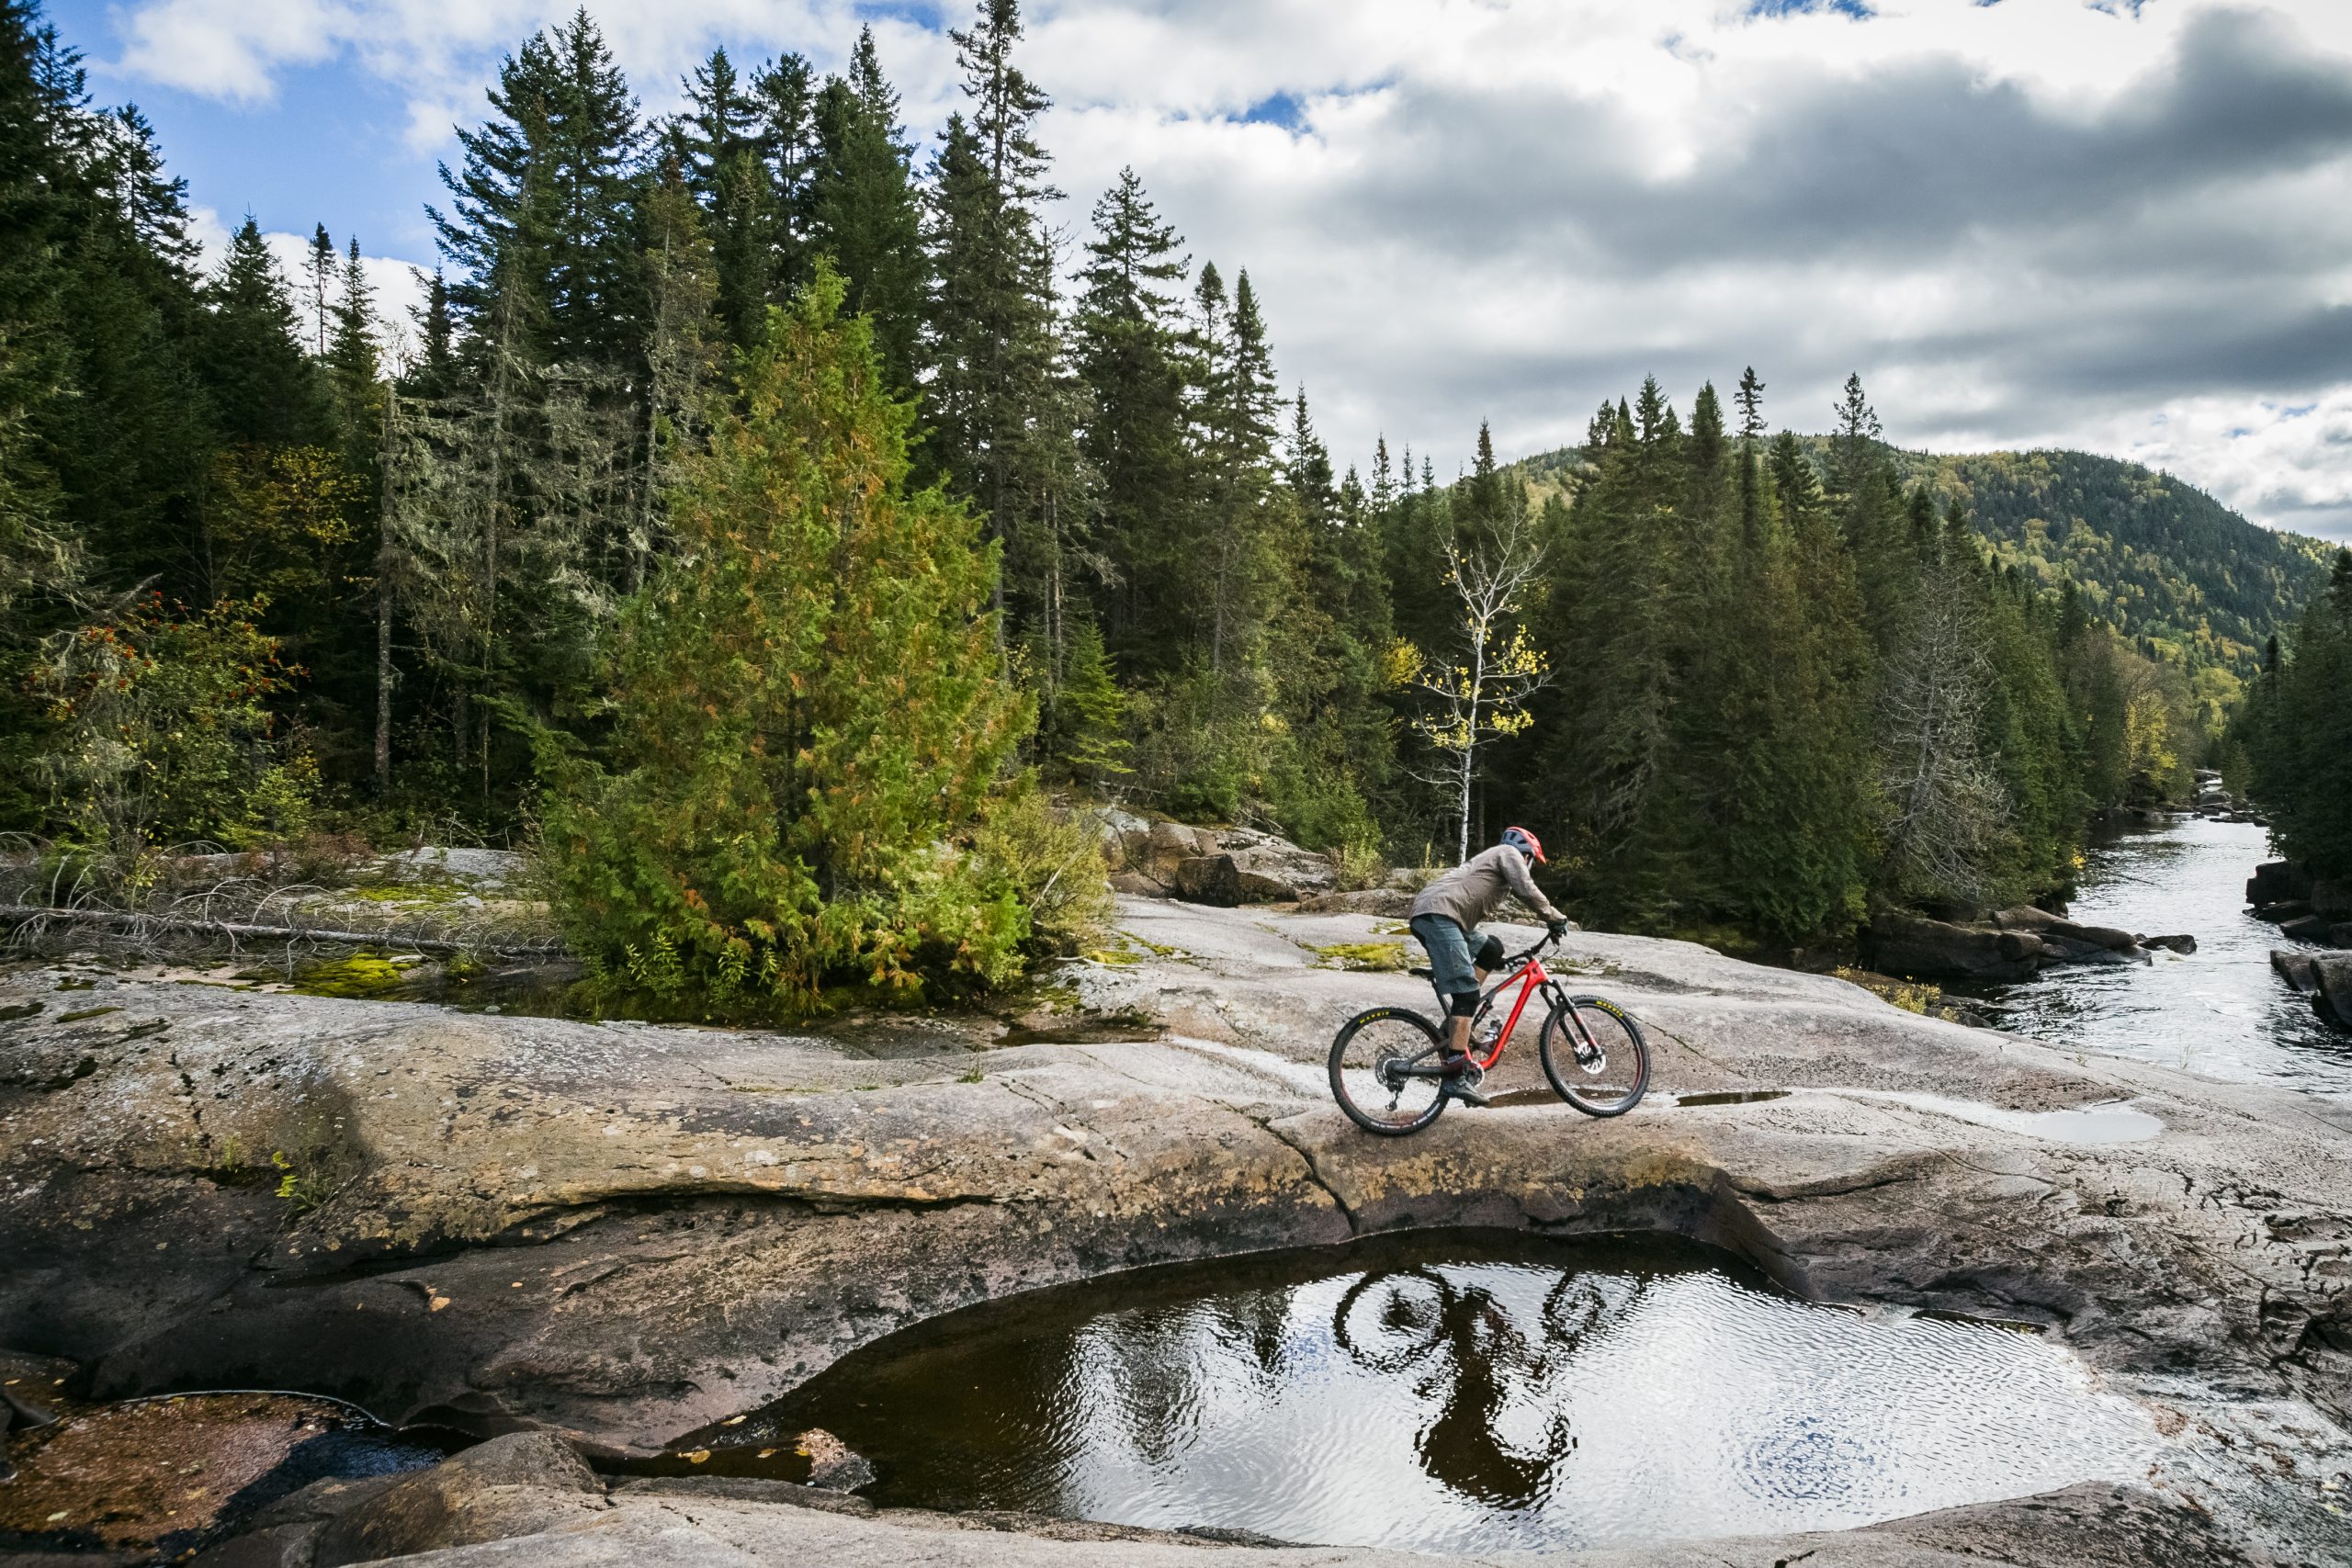 View of a cyclist enjoying an outdoor activity surrounded by nature, in the Neilson sector, ideal for adventure enthusiasts and more experienced cyclists.